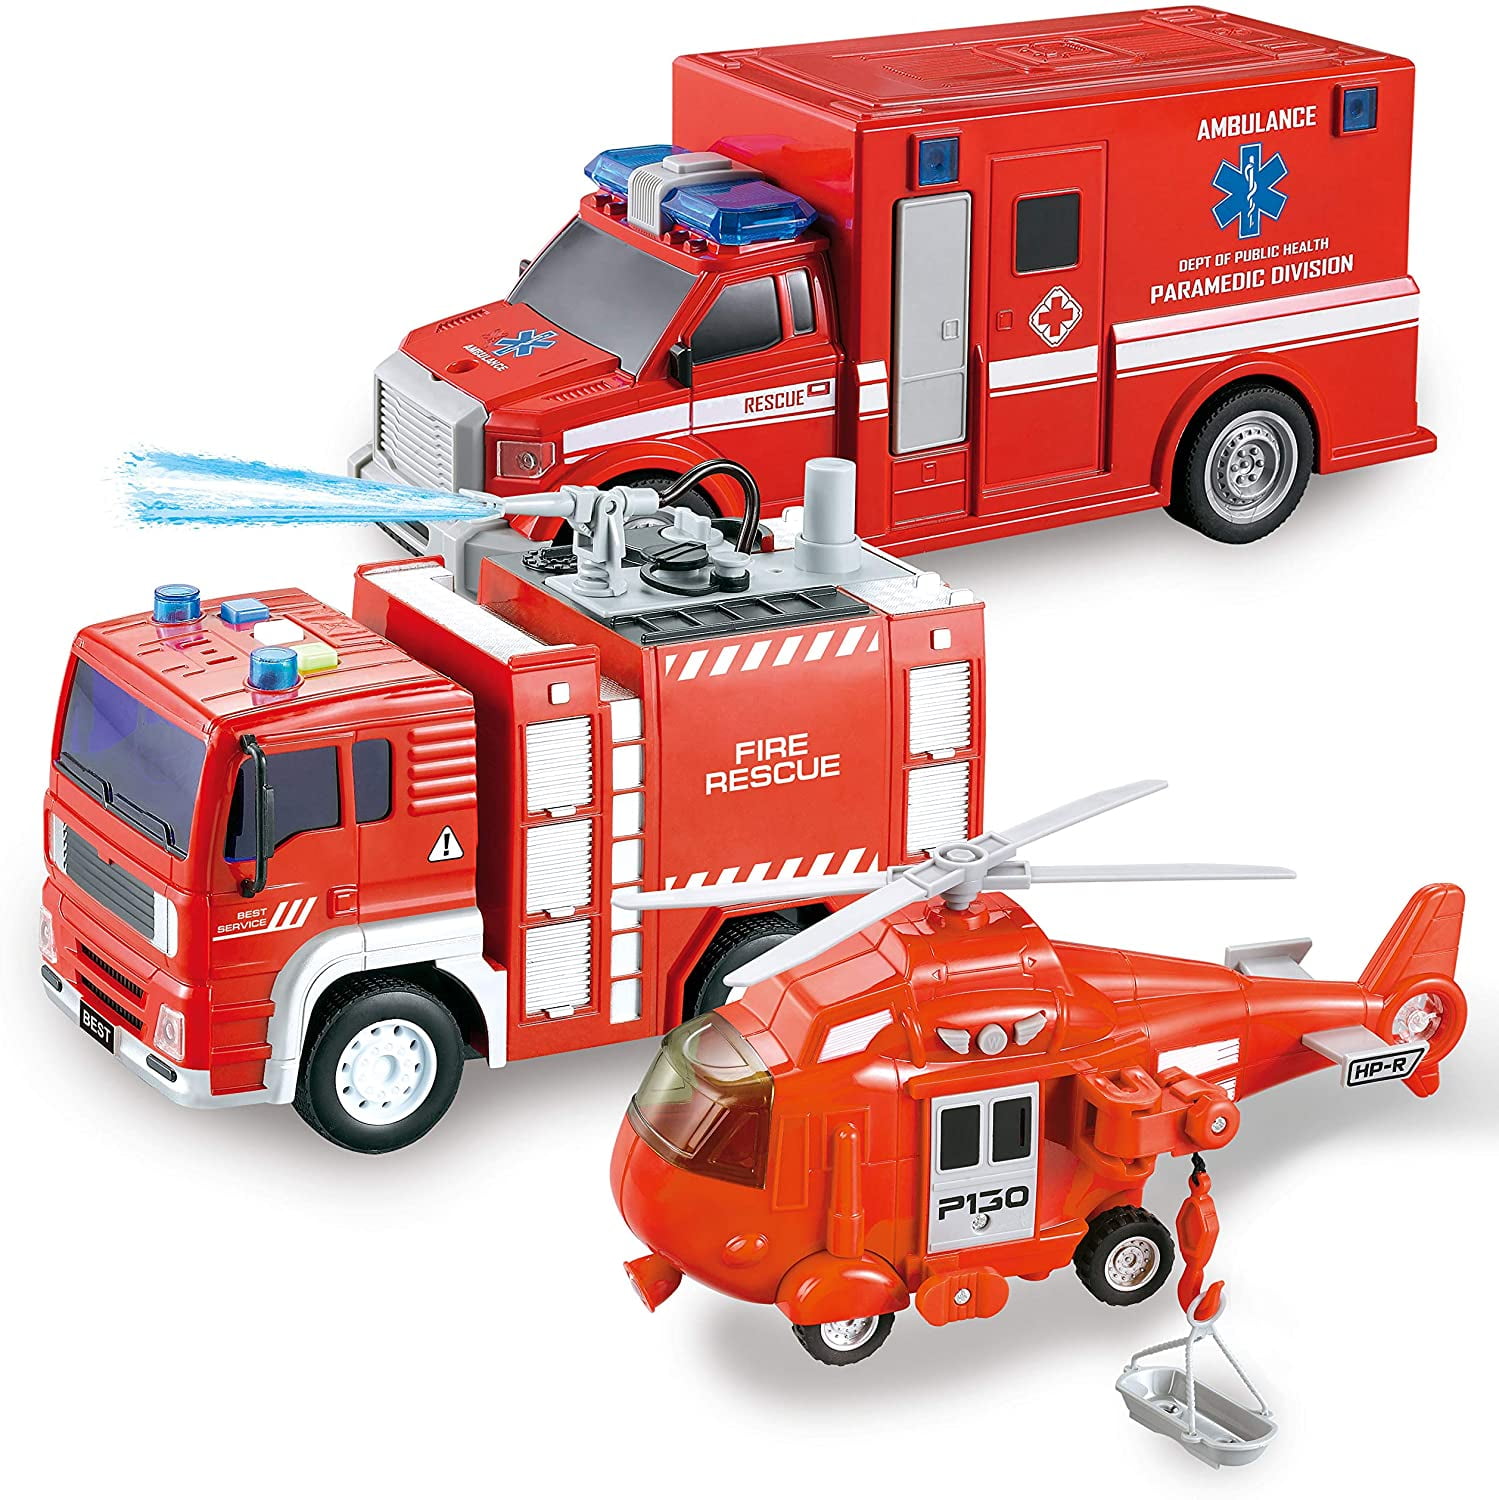 Teamsterz Large Light & Sound Fire HelicopterKids Emergency Fire Toy Vehicle 